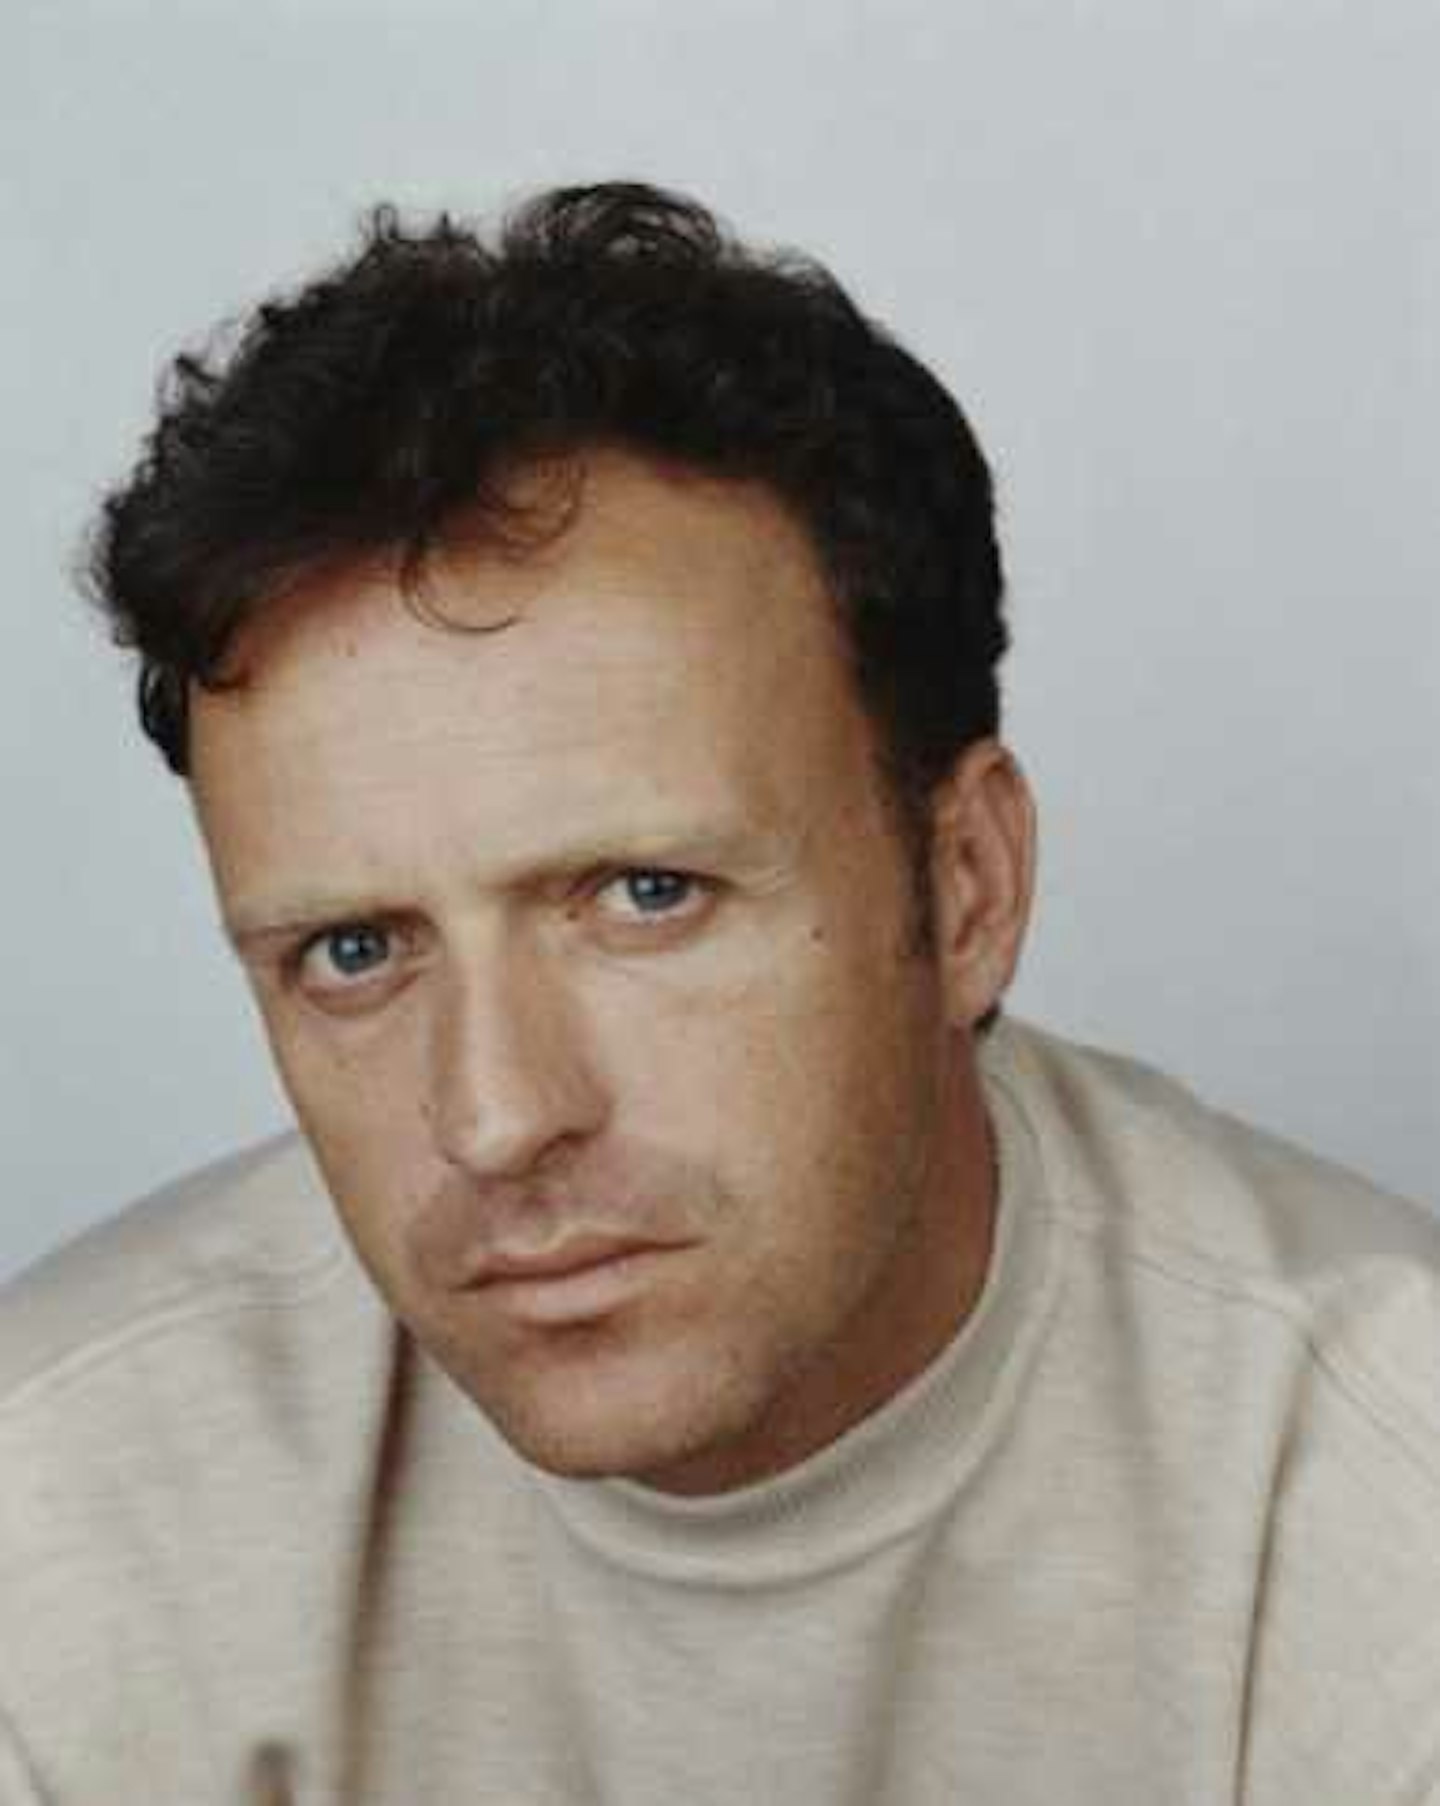 2. Barry Grant